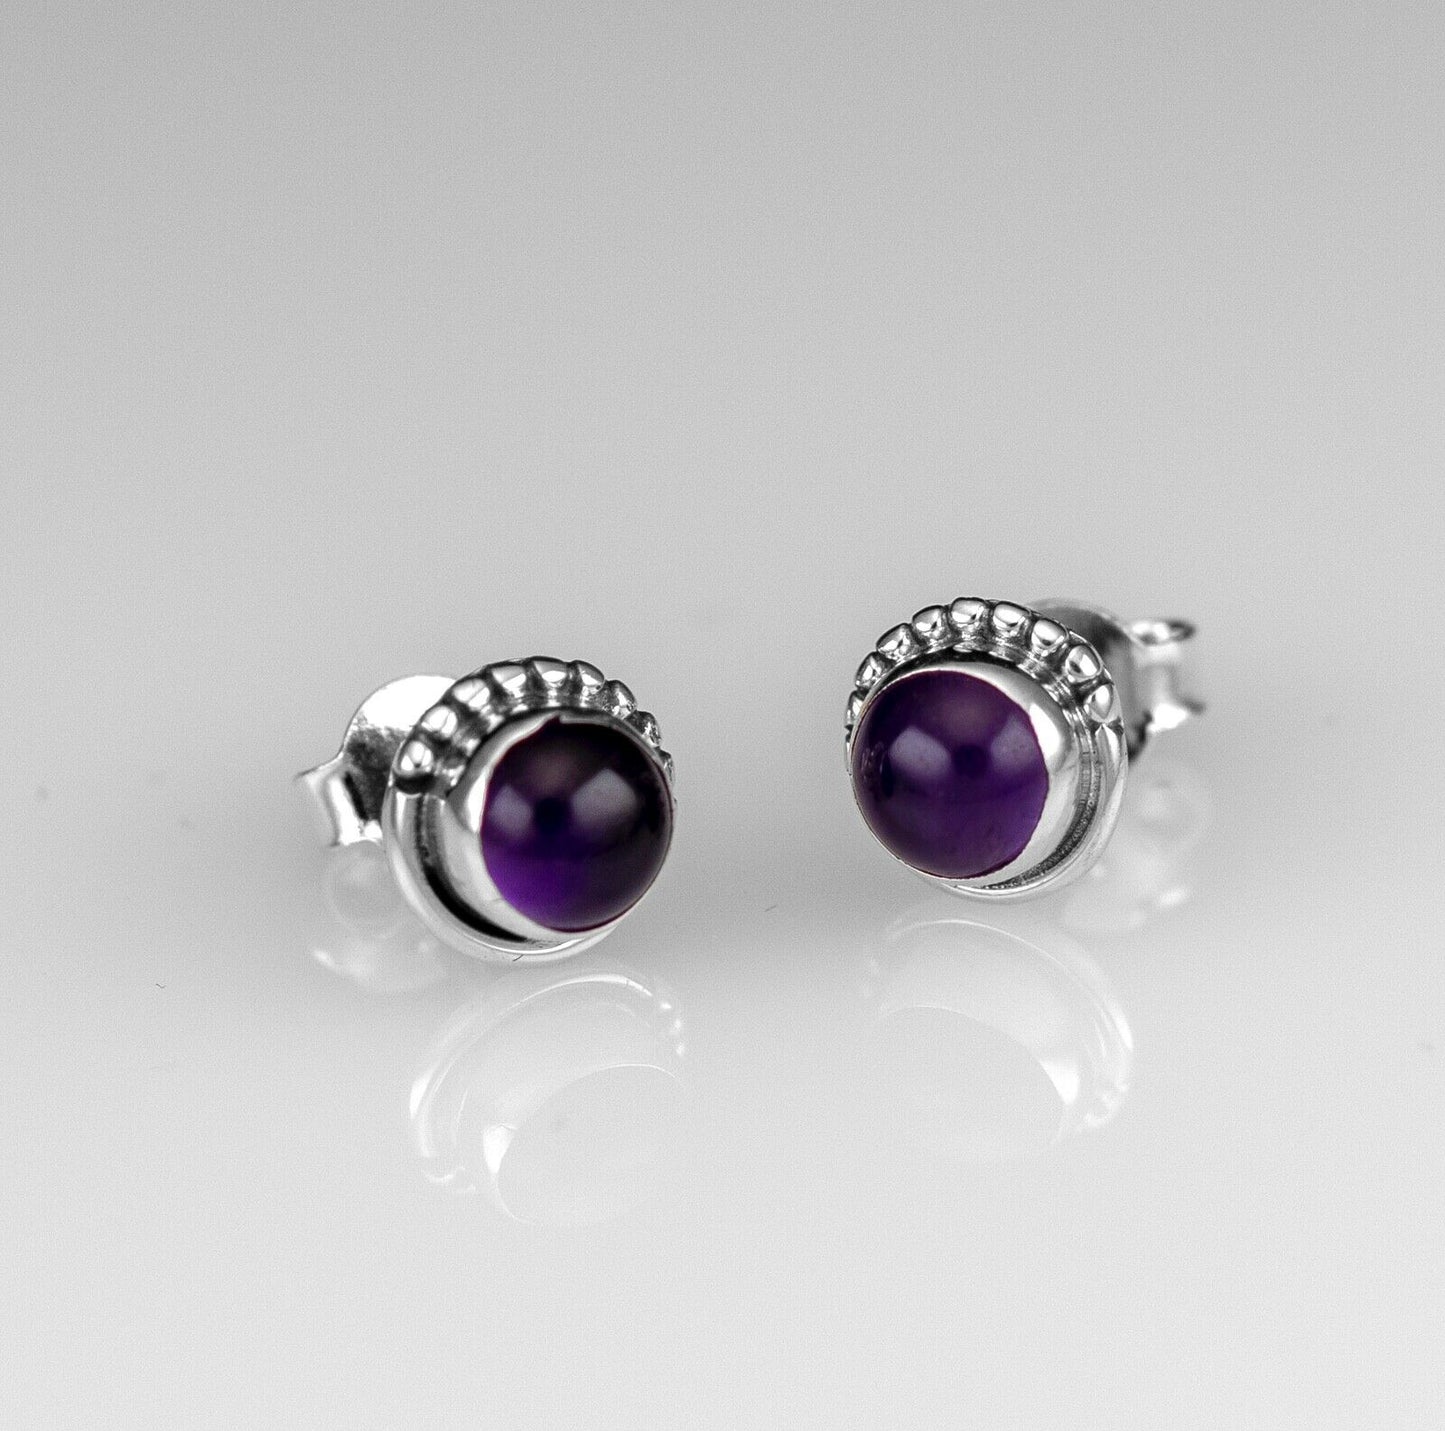 Beautiful 925 Sterling Silver Amethyst Earrings Studs Round Gemstone Gift Boxed